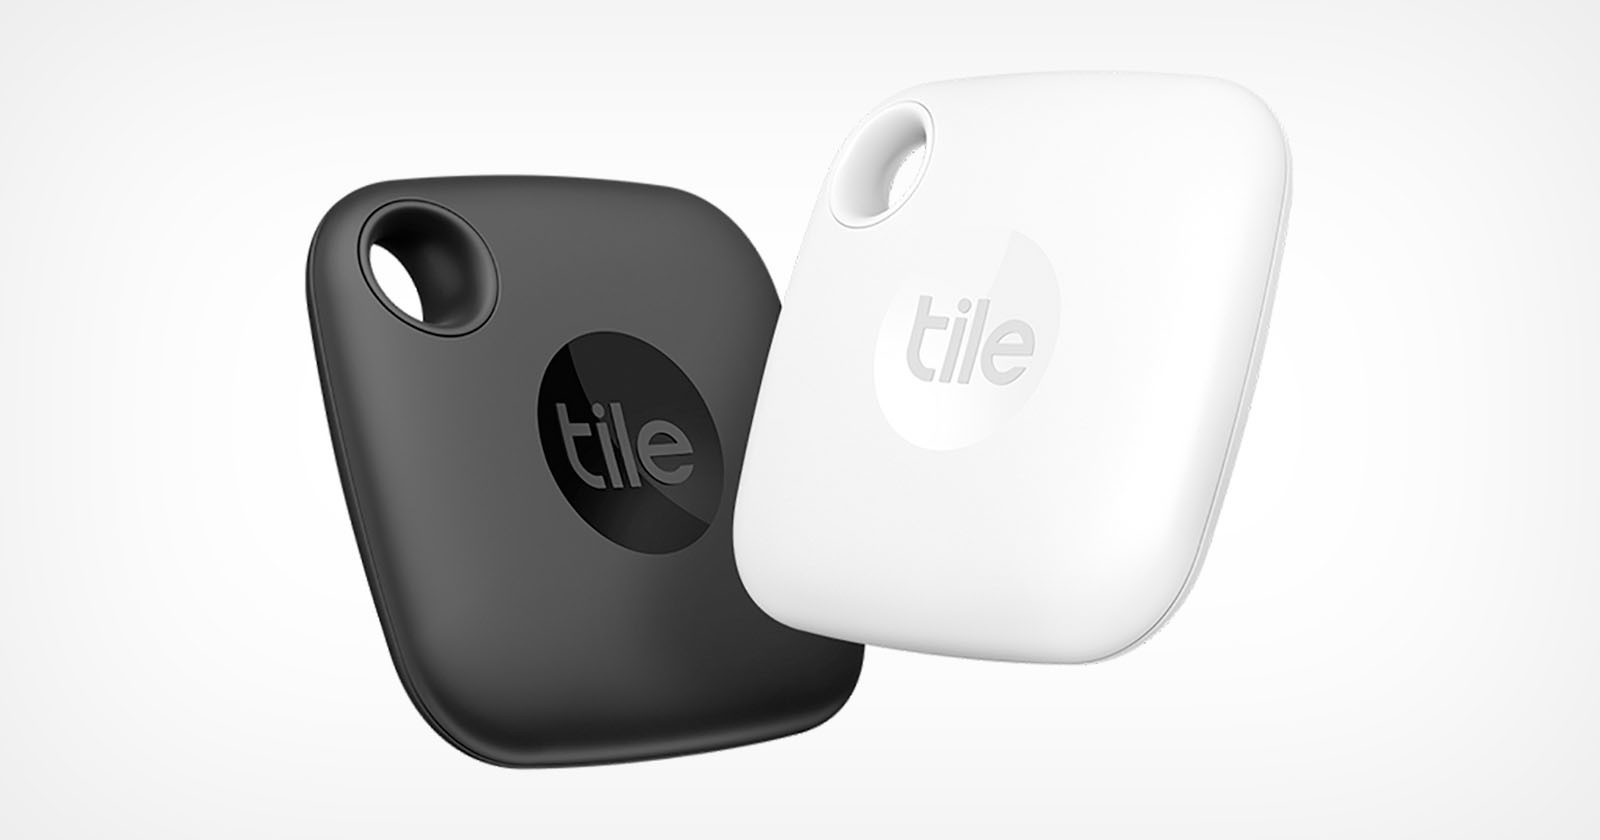  tile fine users tracking people without their 